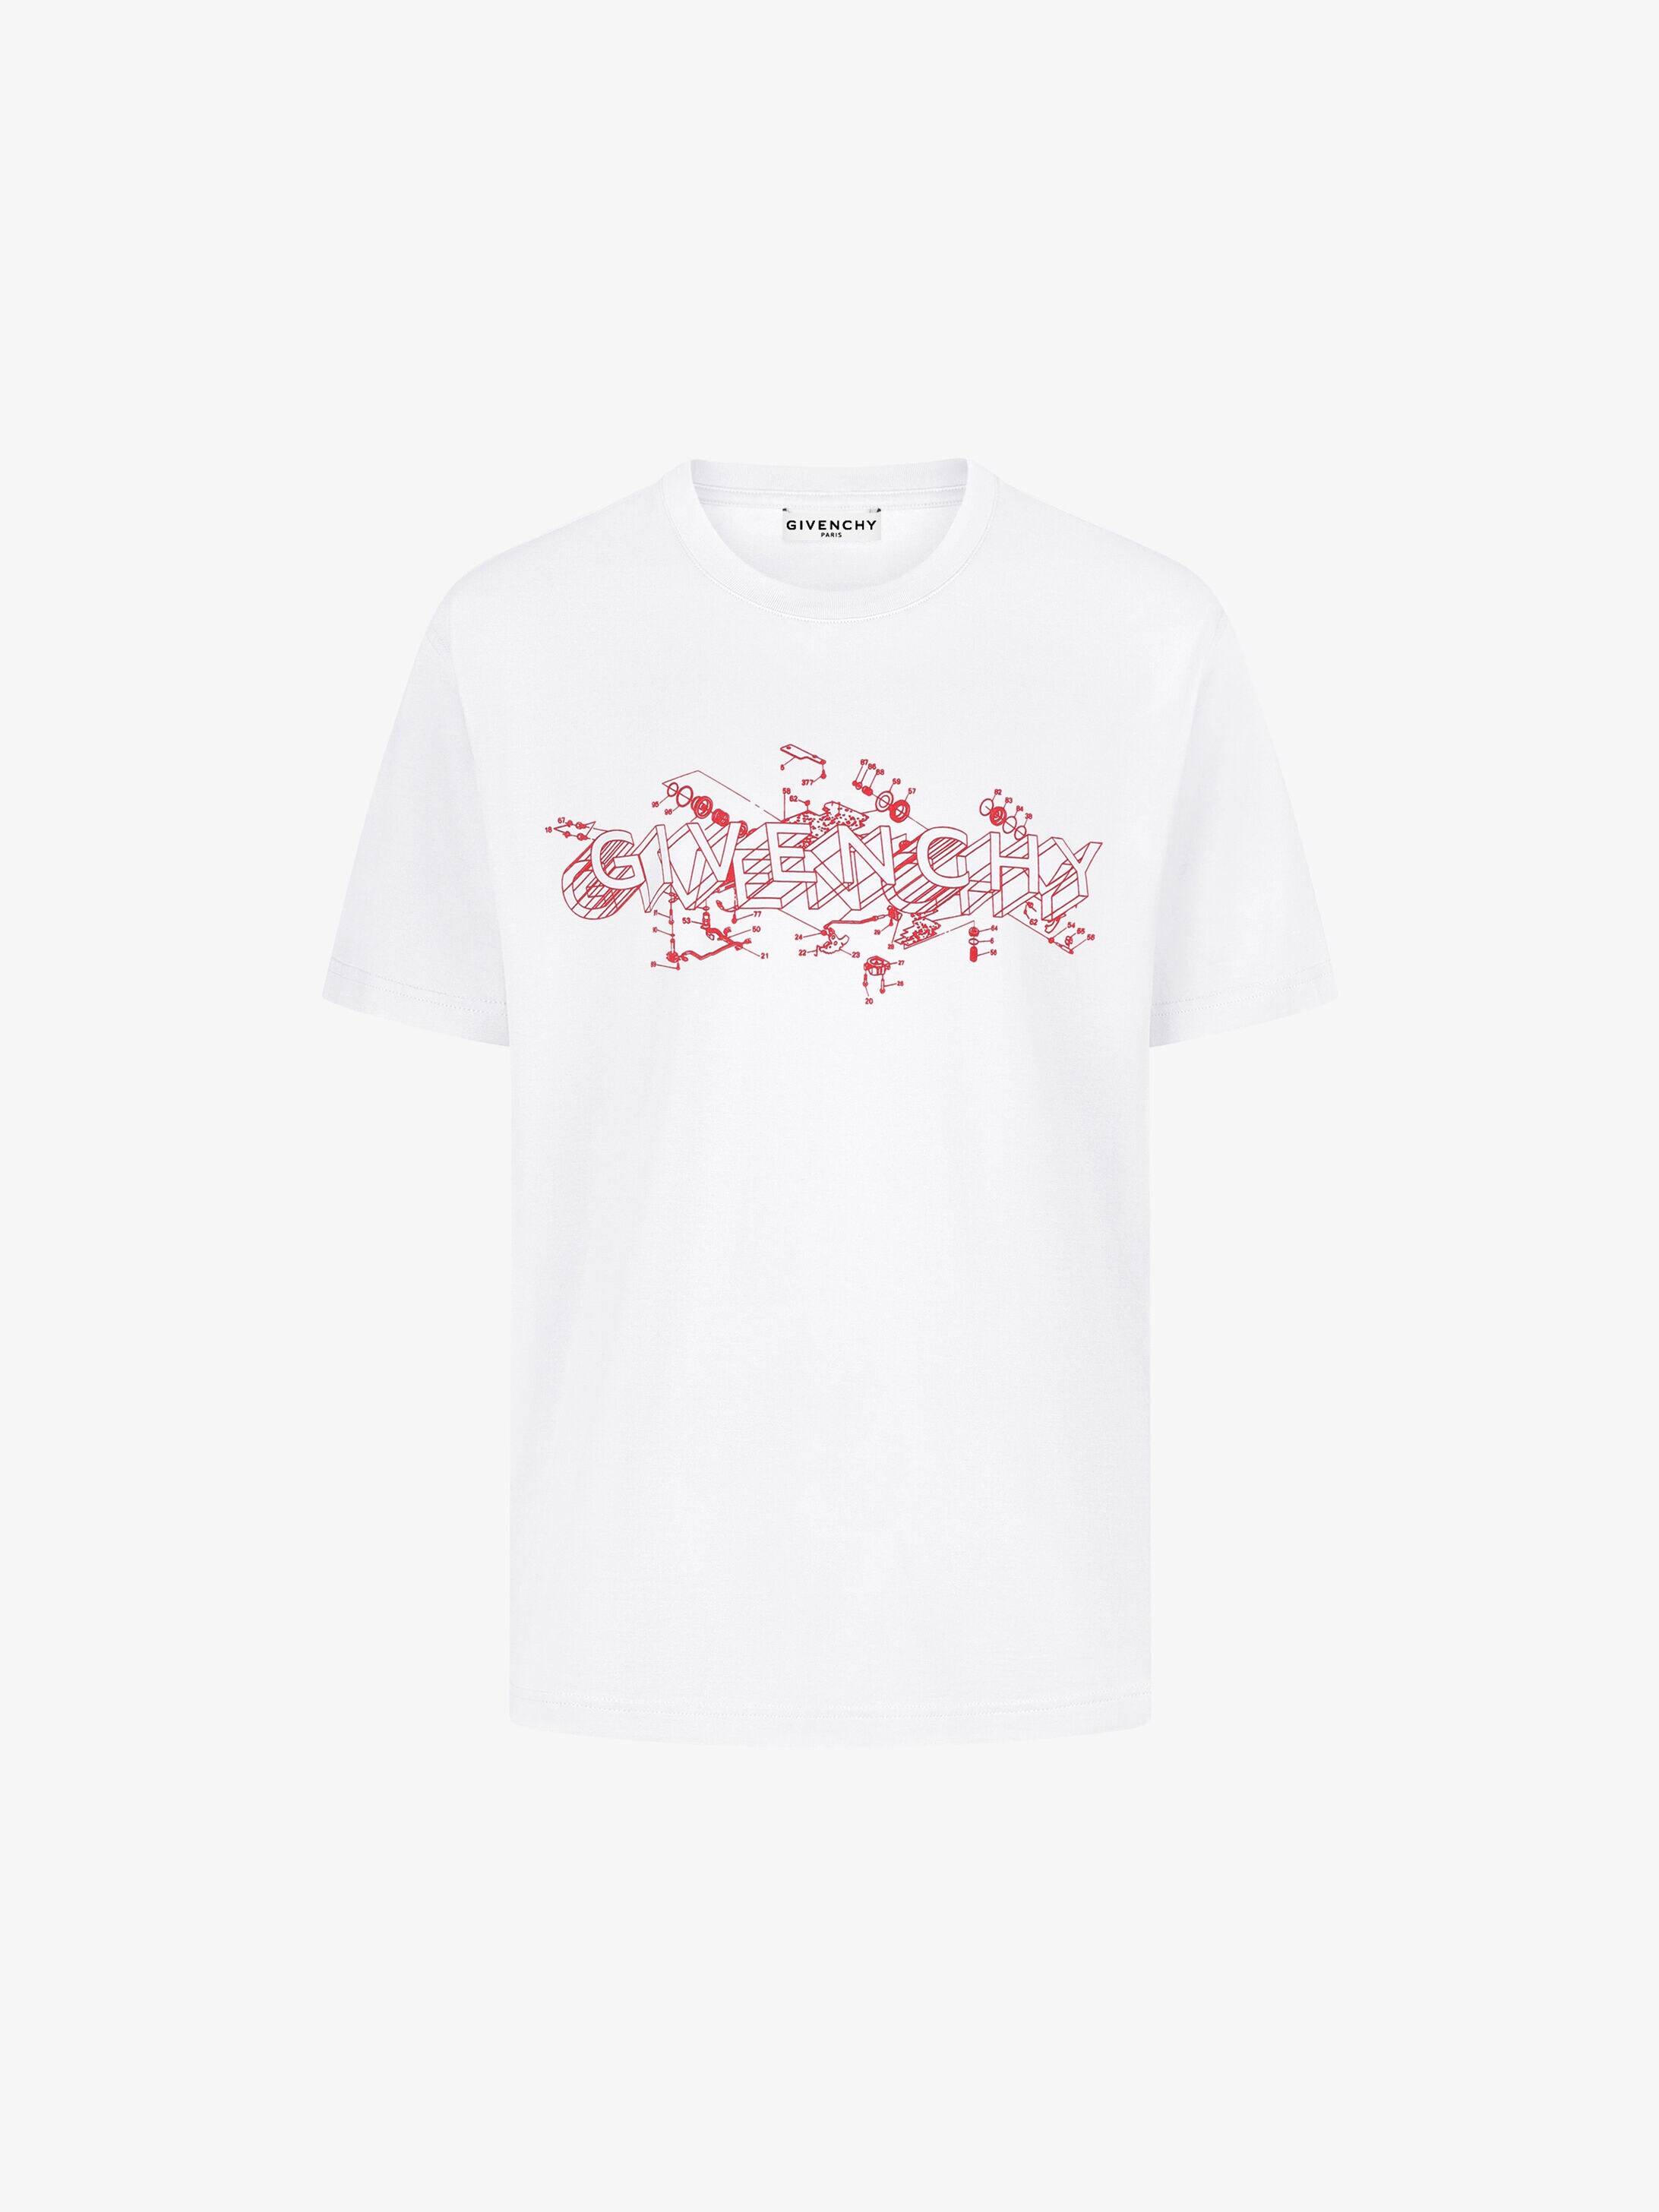 givenchy t shirt price in india